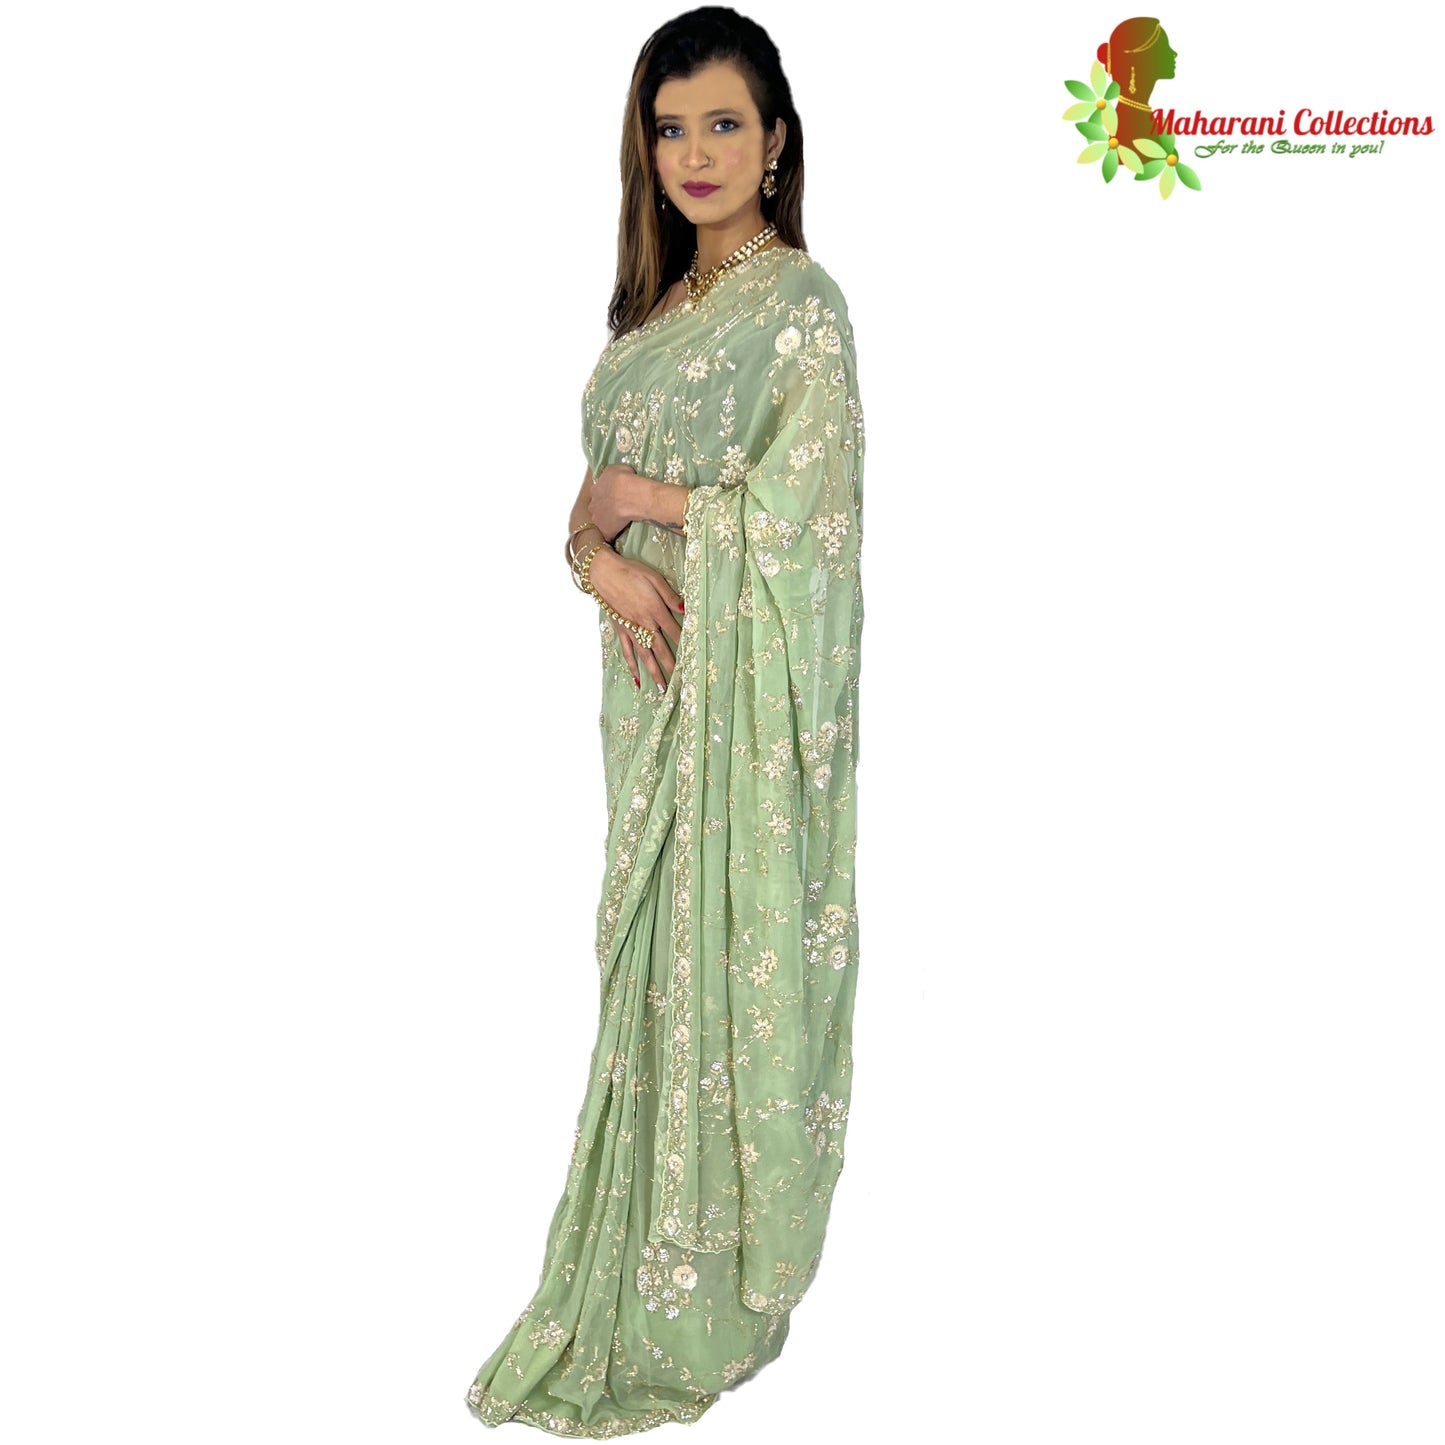 Maharani's Party Wear Georgette Heavy Work Saree - Sea Green (with Stitched Petticoat)